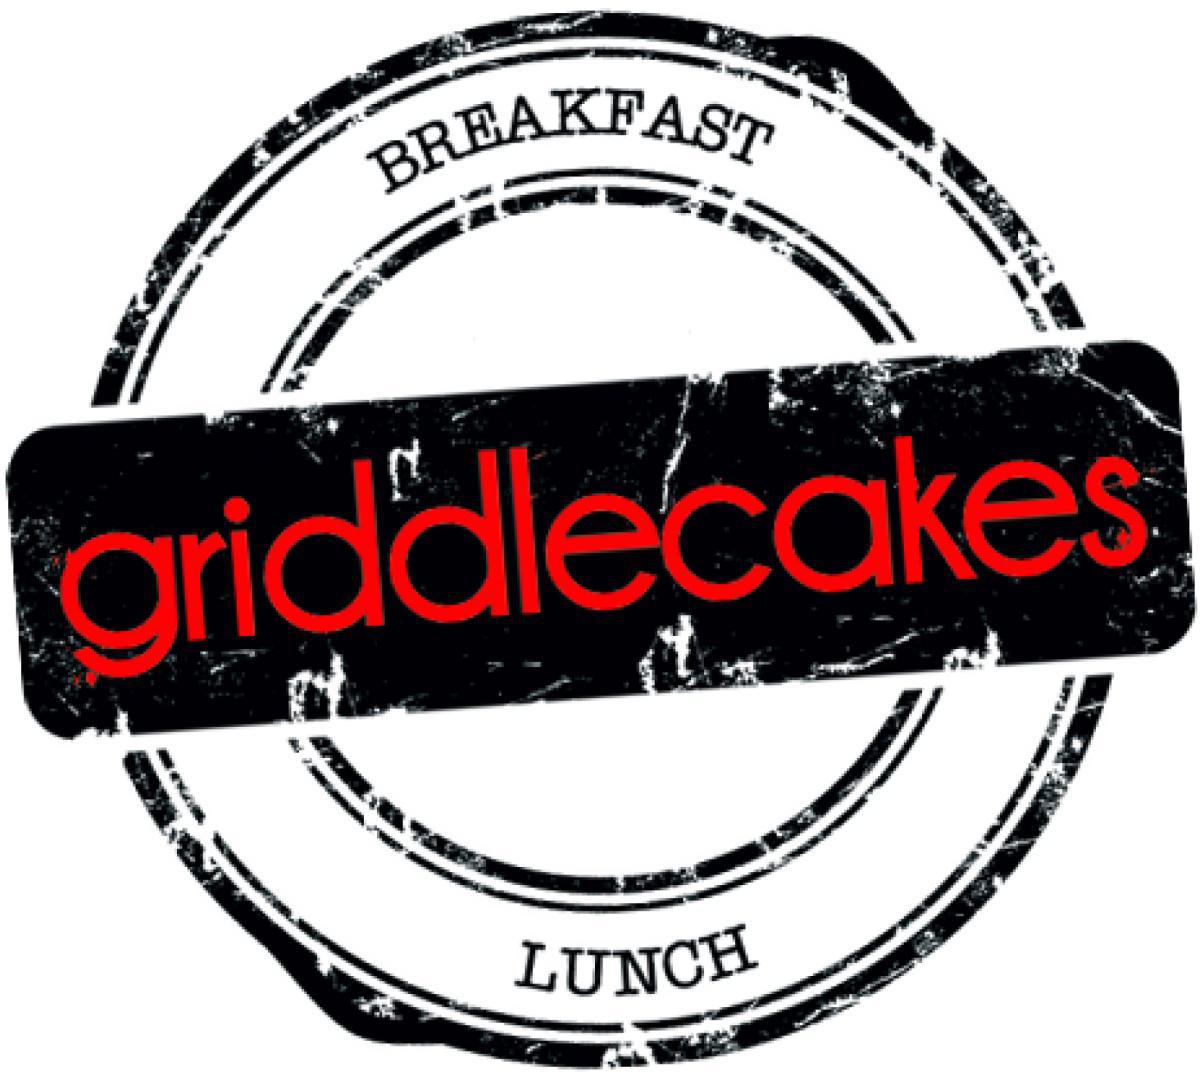 Griddlecakes @ S. Forte Apache Rd.